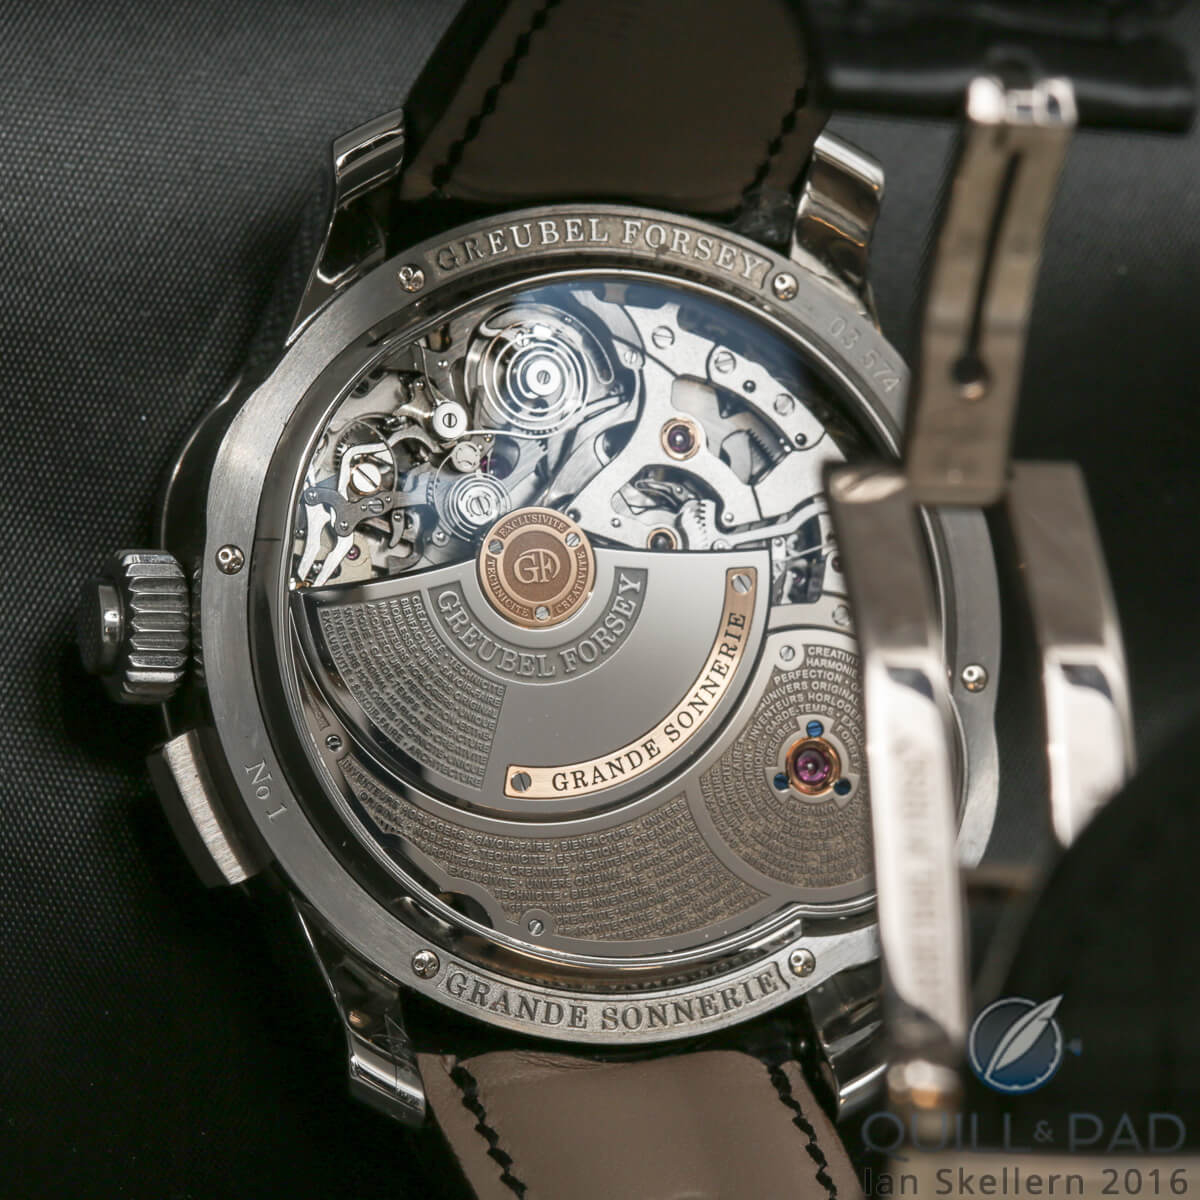 View through the display back to the movement of the Greubel Forsey Grande Sonnerie with the large 